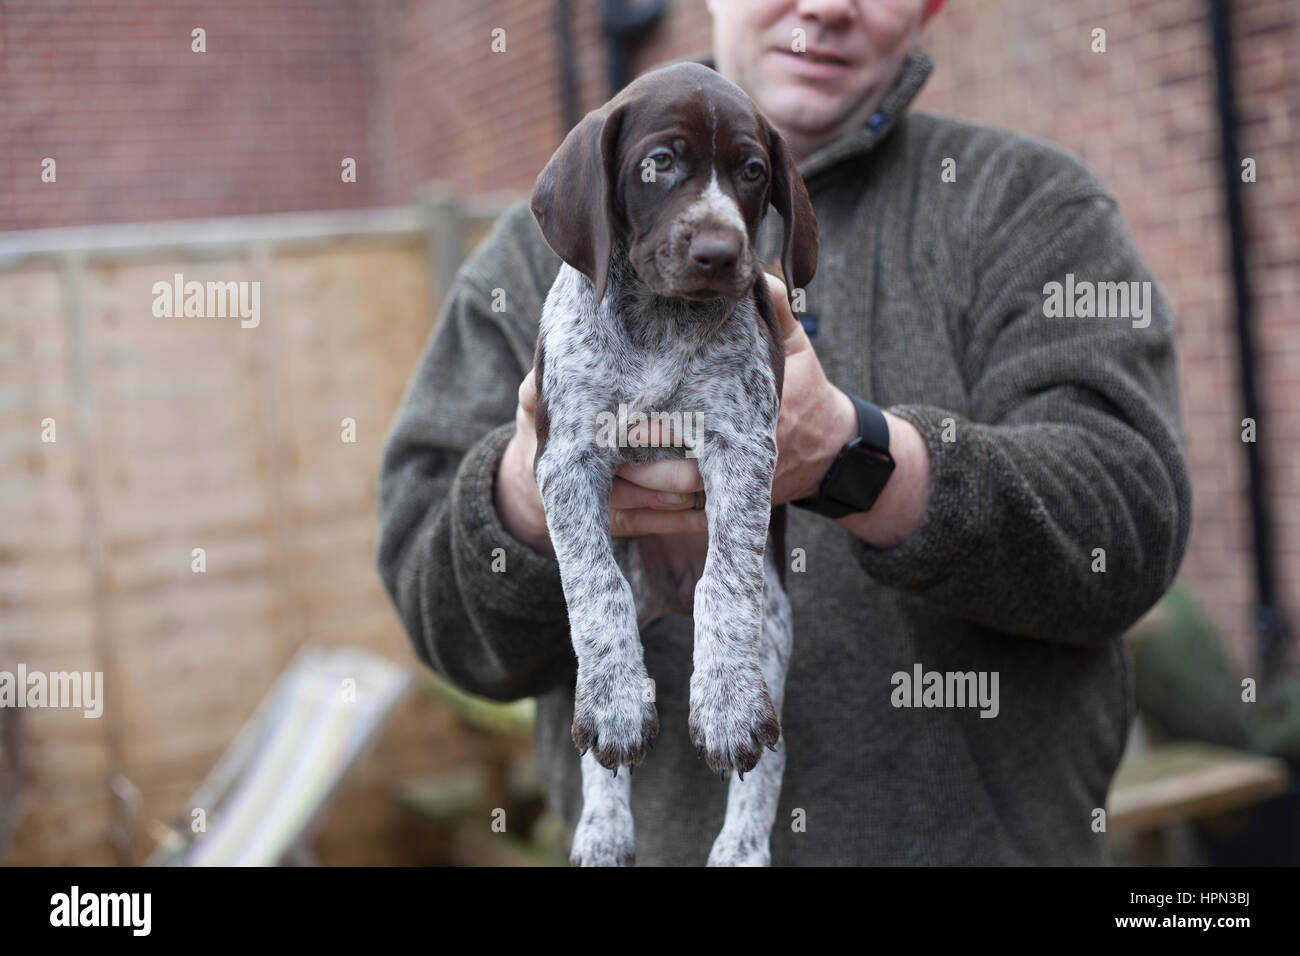 SURREY, UNITED KINGDOM. Jim Hannon, 41, of Roburretreat Kennels (based in Farnham, Surrey), holds a five week old German Short Haired pointer puppy. Stock Photo